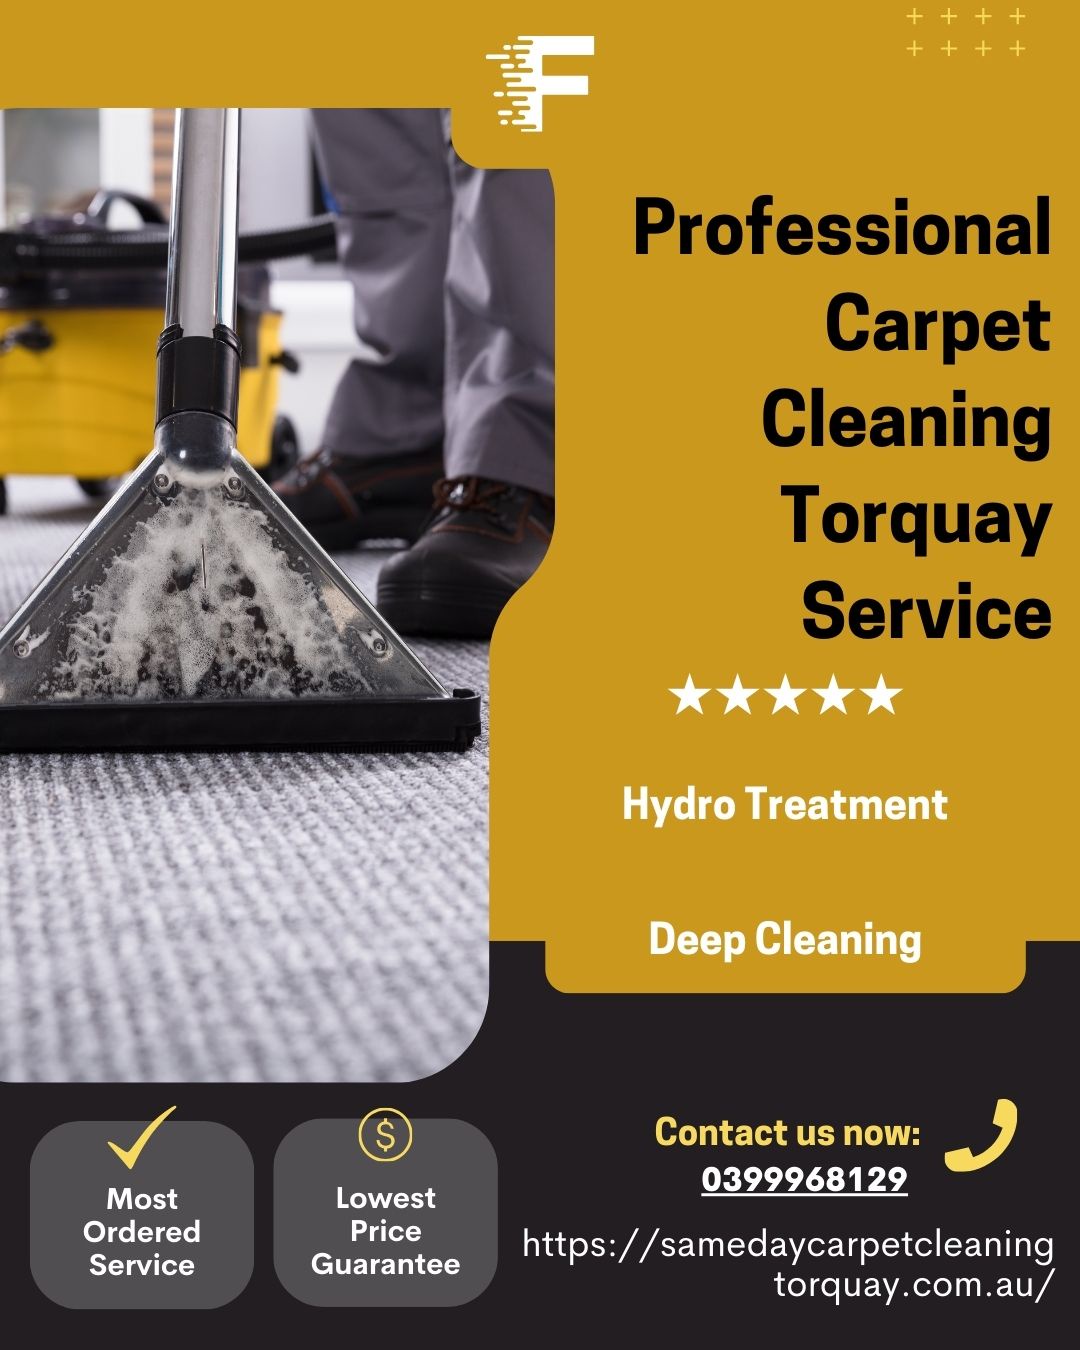 5 Key Benefits of Professional Carpet Cleaning in Torquay